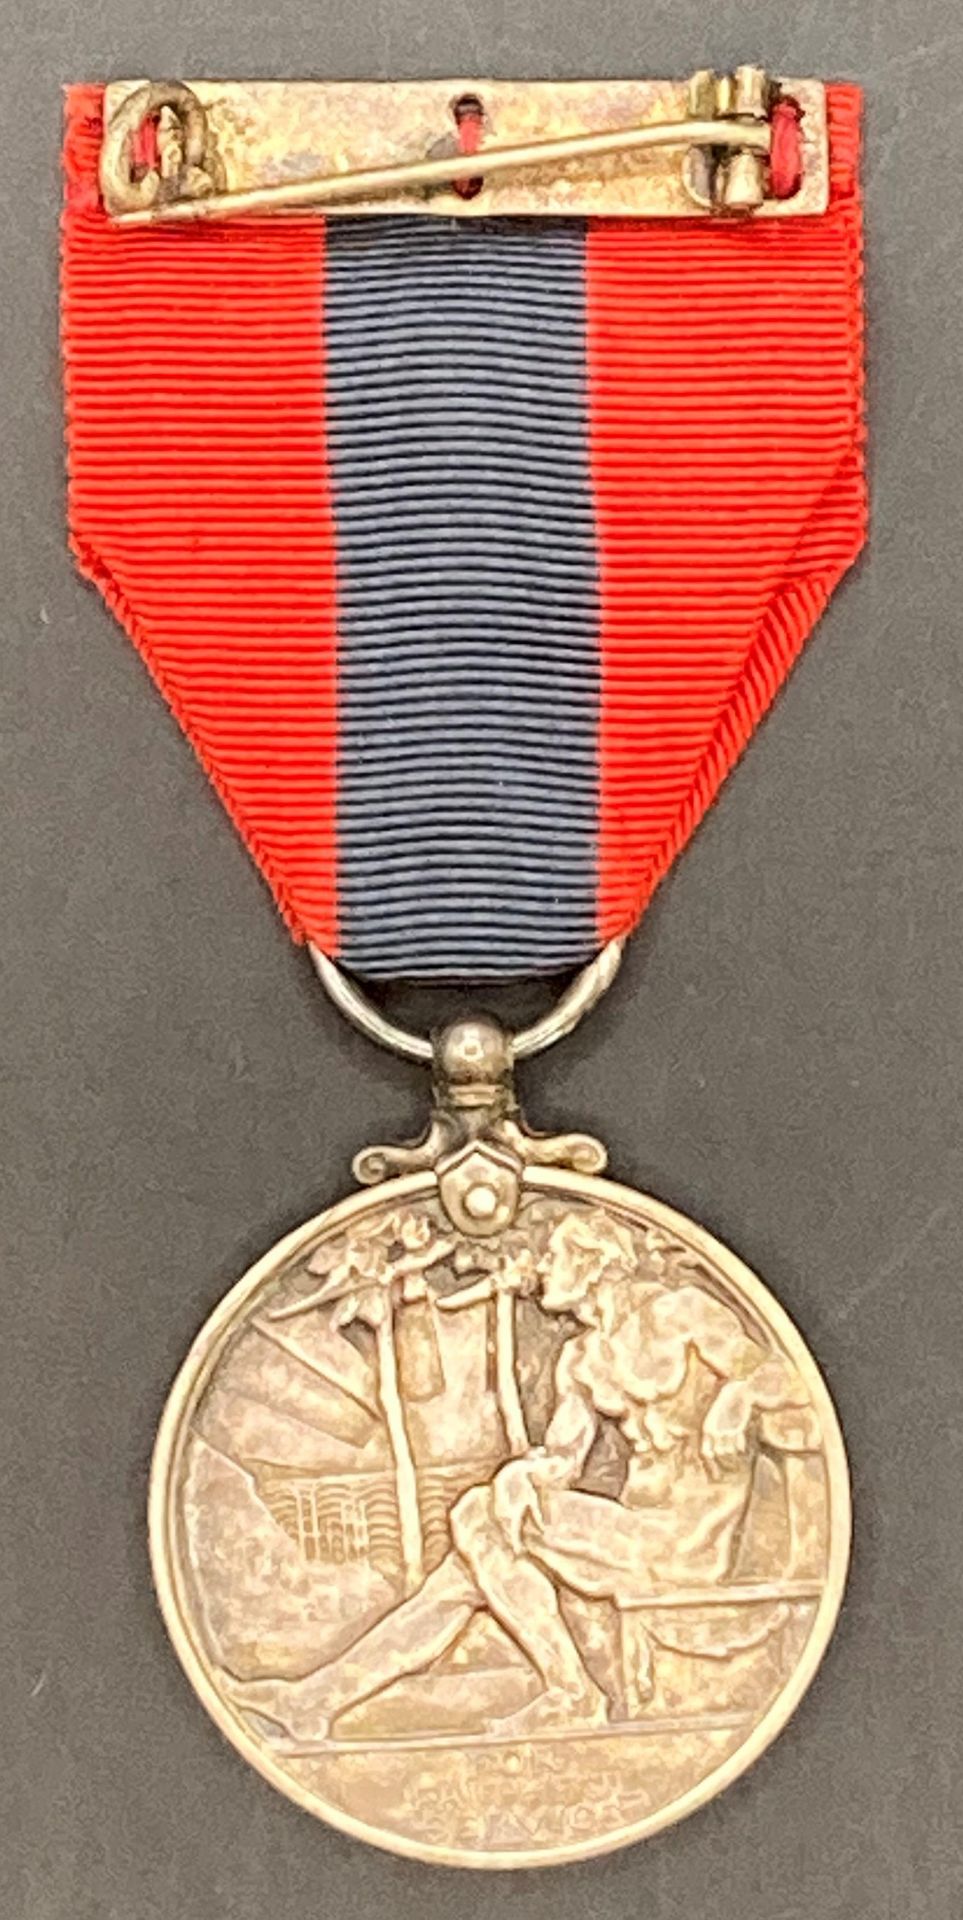 Imperial Service Medal George V named to WILLIAM JAMES SHEER awarded 1920 whilst serving as a - Image 2 of 4